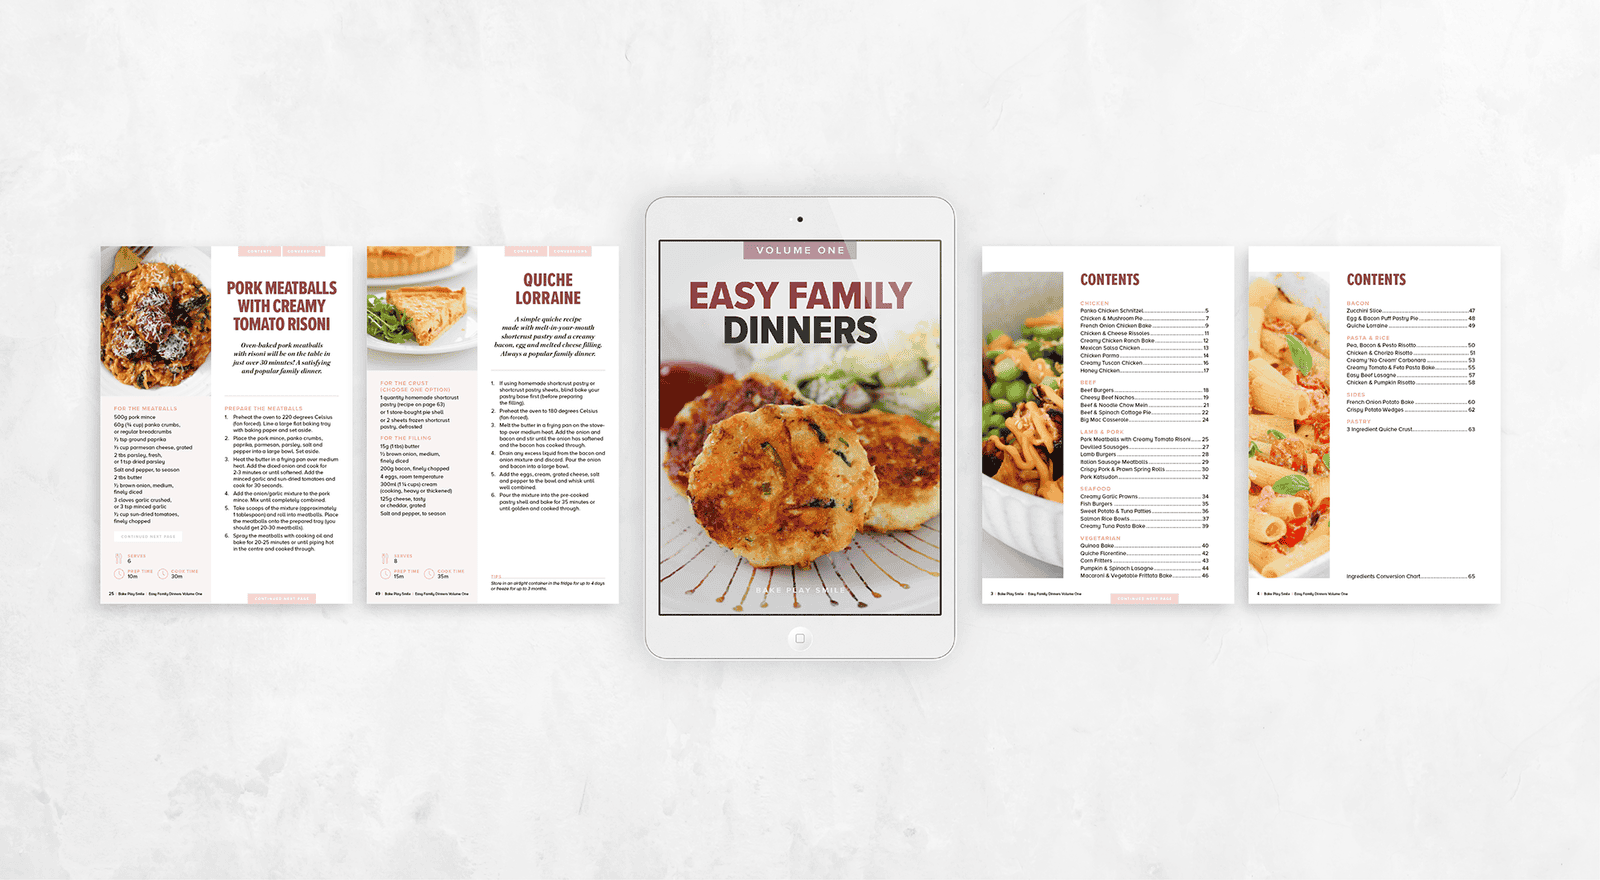 A collage of dinners recipes in an ebook.